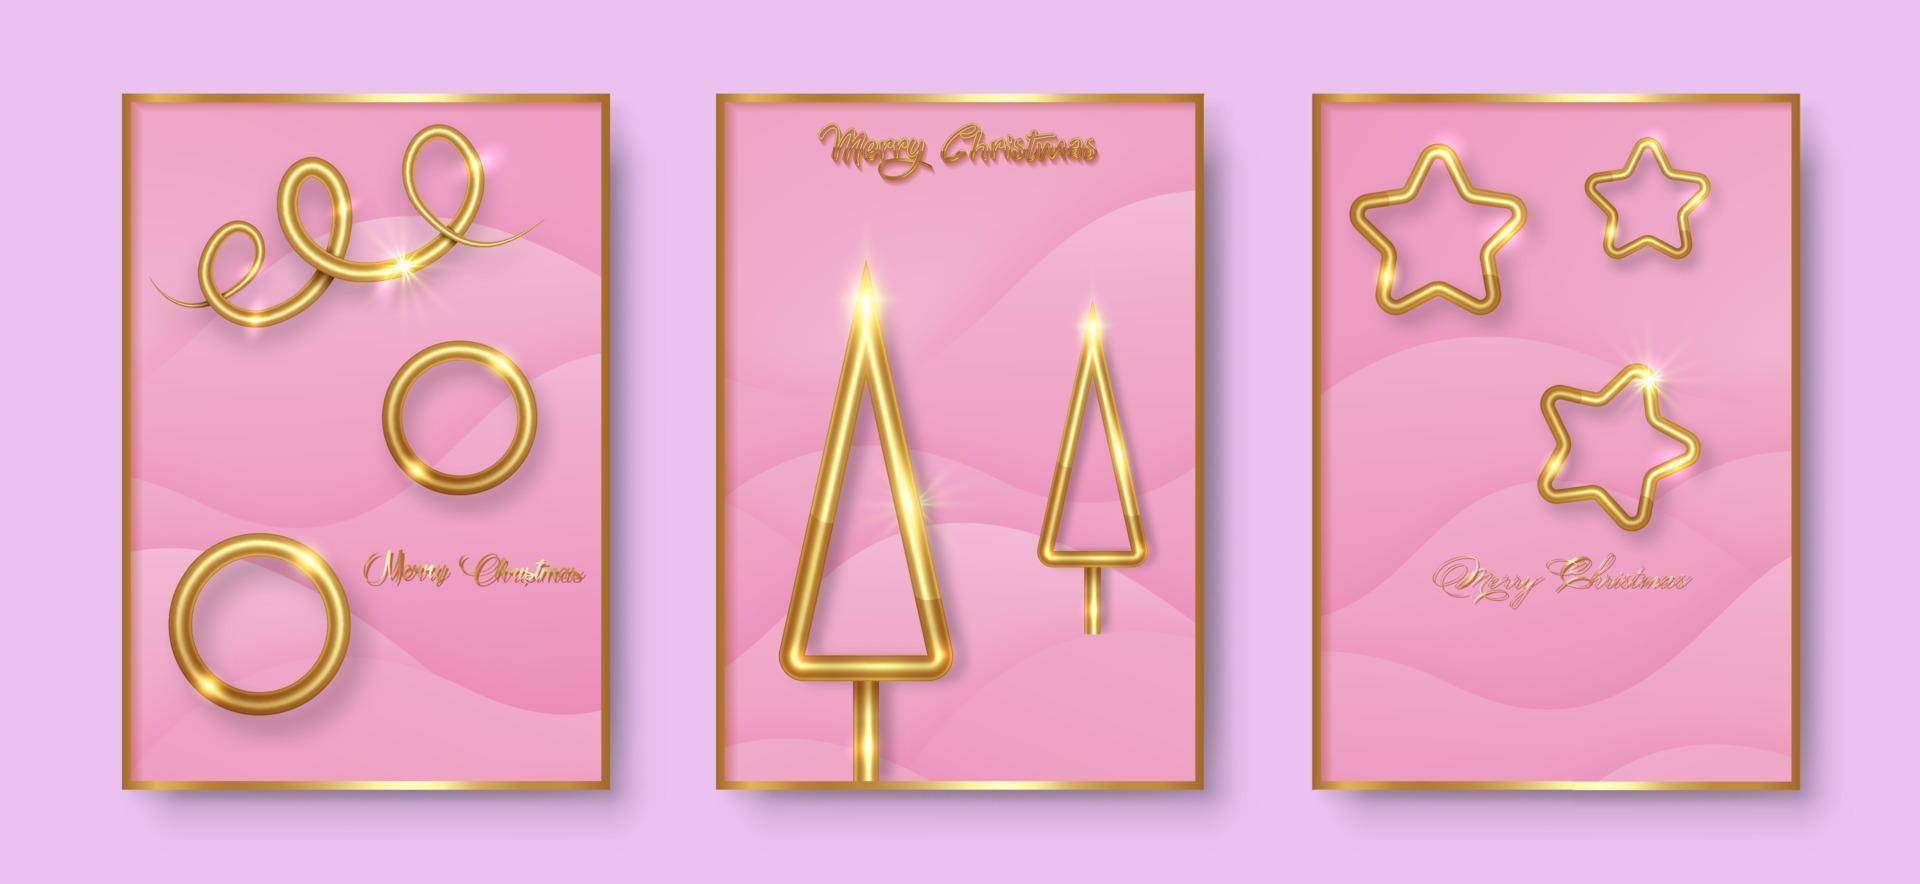 set cards Merry Christmas gold texture, golden luxury elements, pink paper cut background for calendar and greetings card or Christmas themed winter holiday invitations with geometric decorations vector